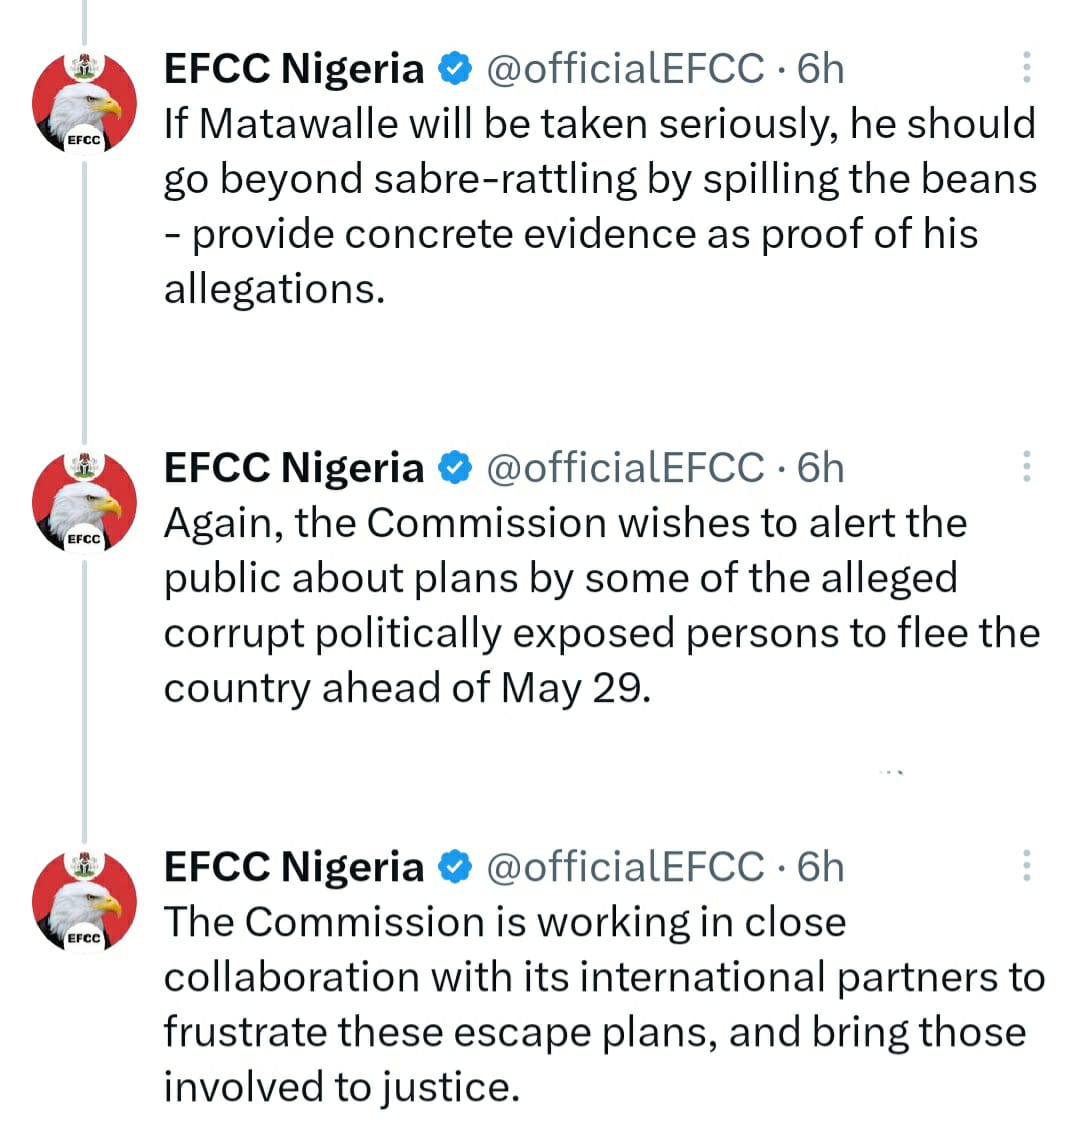 We will not bandy words with a suspect - EFCC writes after Gov Matawalle alleged the commission